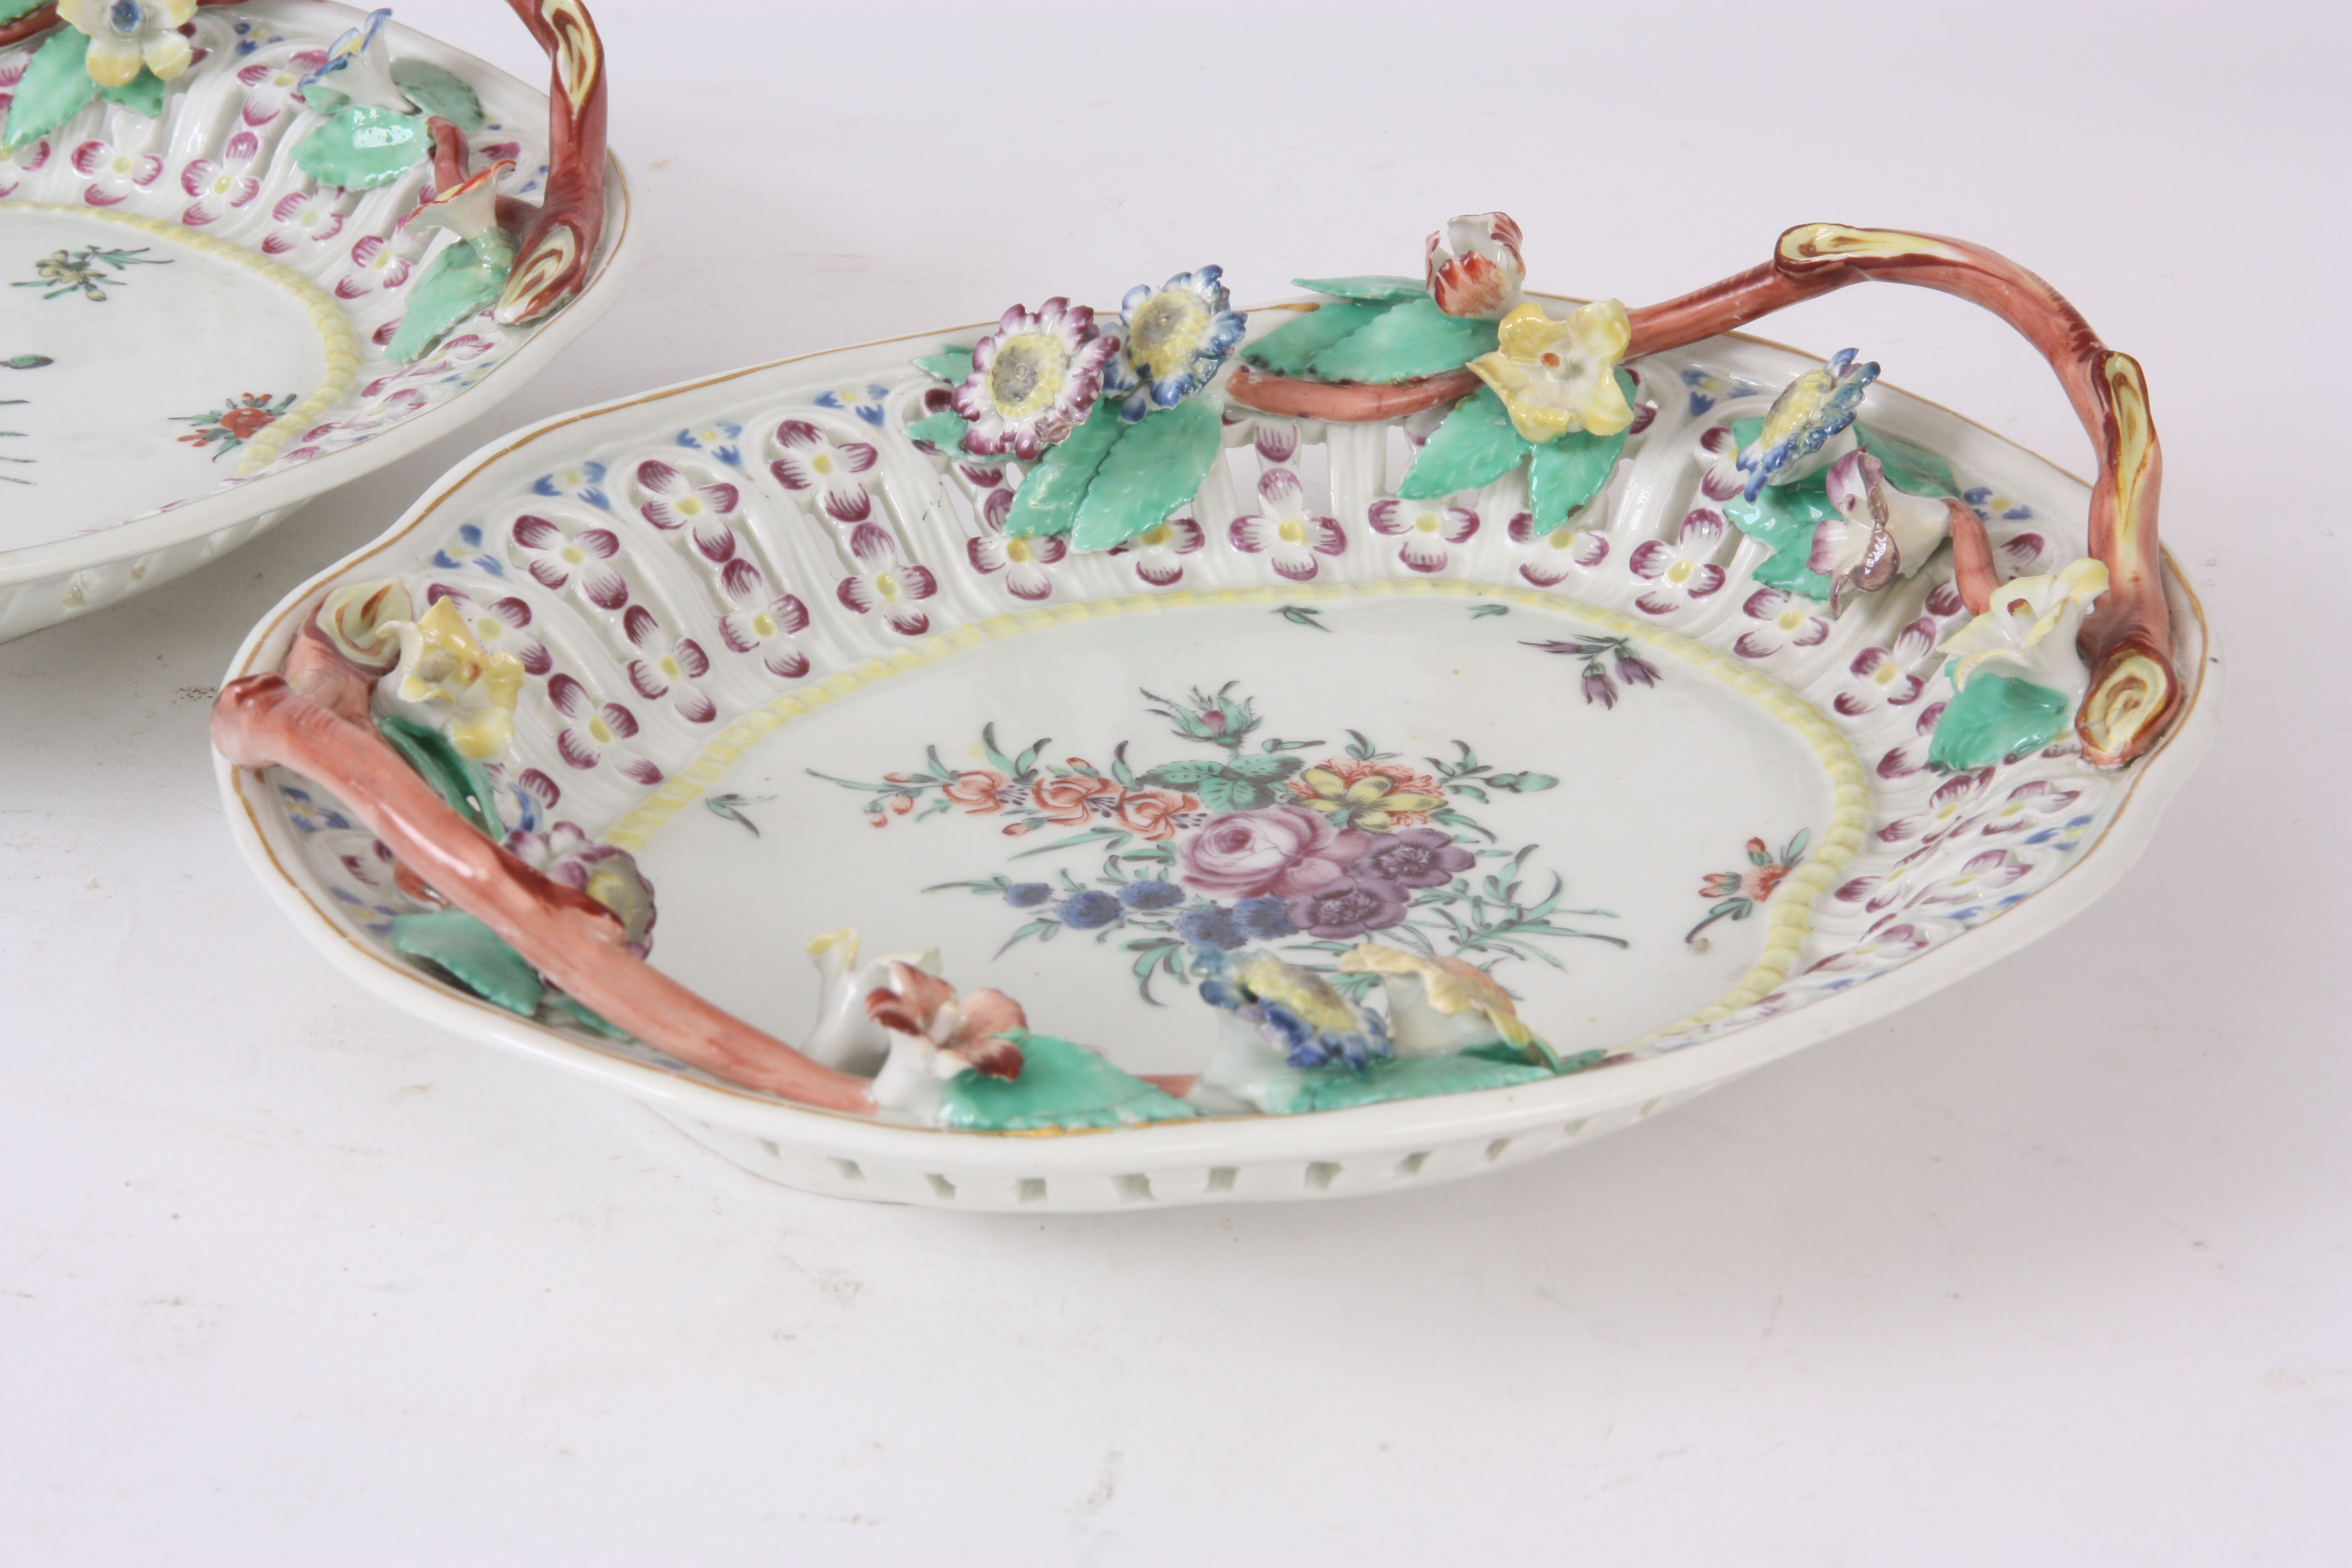 A PAIR OF LATE 18TH CENTURY FIRST PERIOD WORCESTER FACTORY PORCELAIN PIERCED DISHES - Image 2 of 7